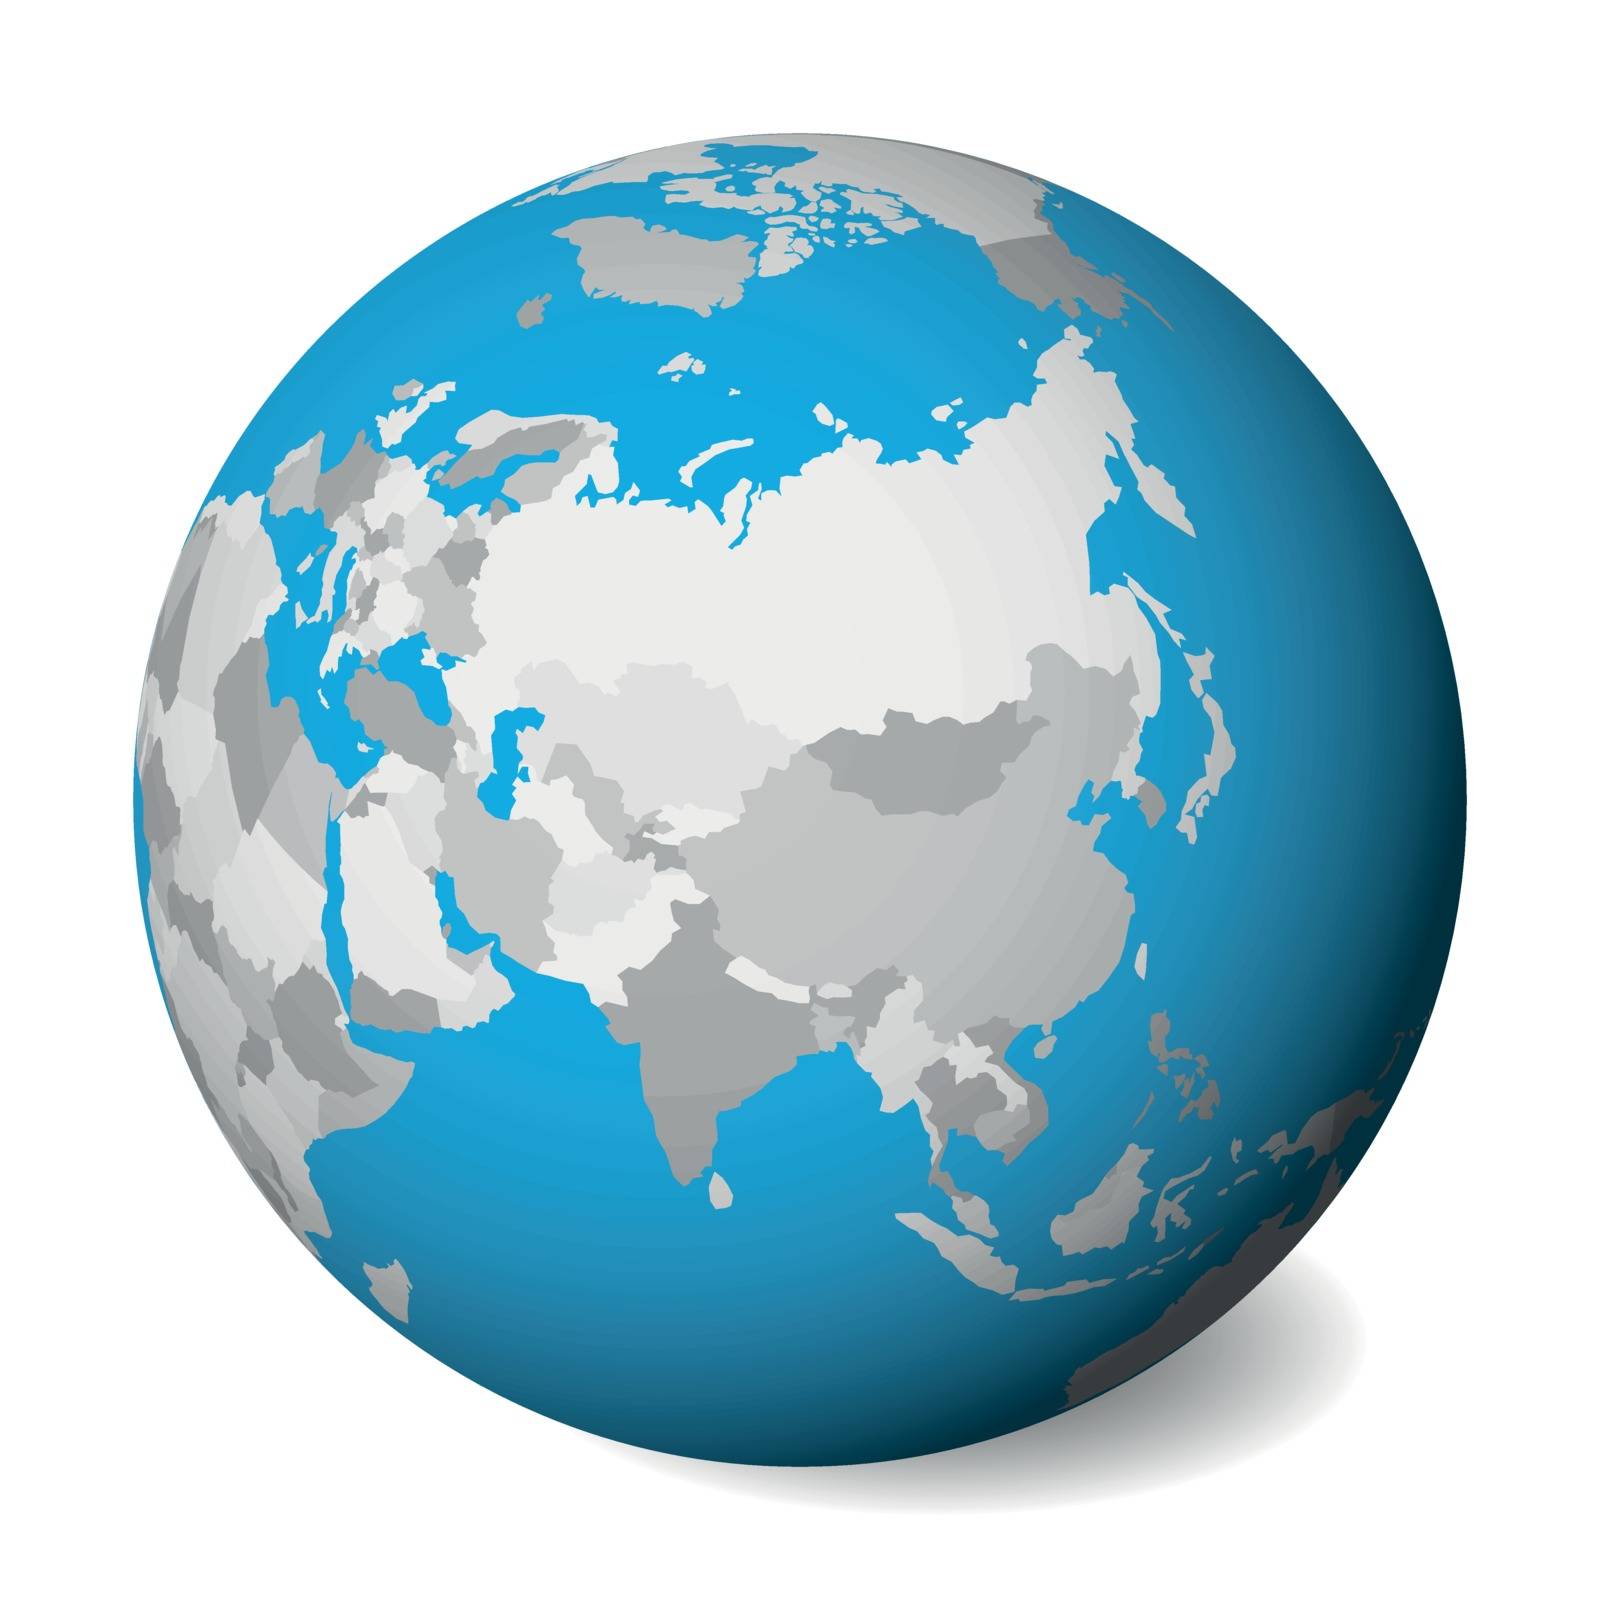 Blank political map of Asia. 3D Earth globe with blue water and grey lands. Vector illustration.